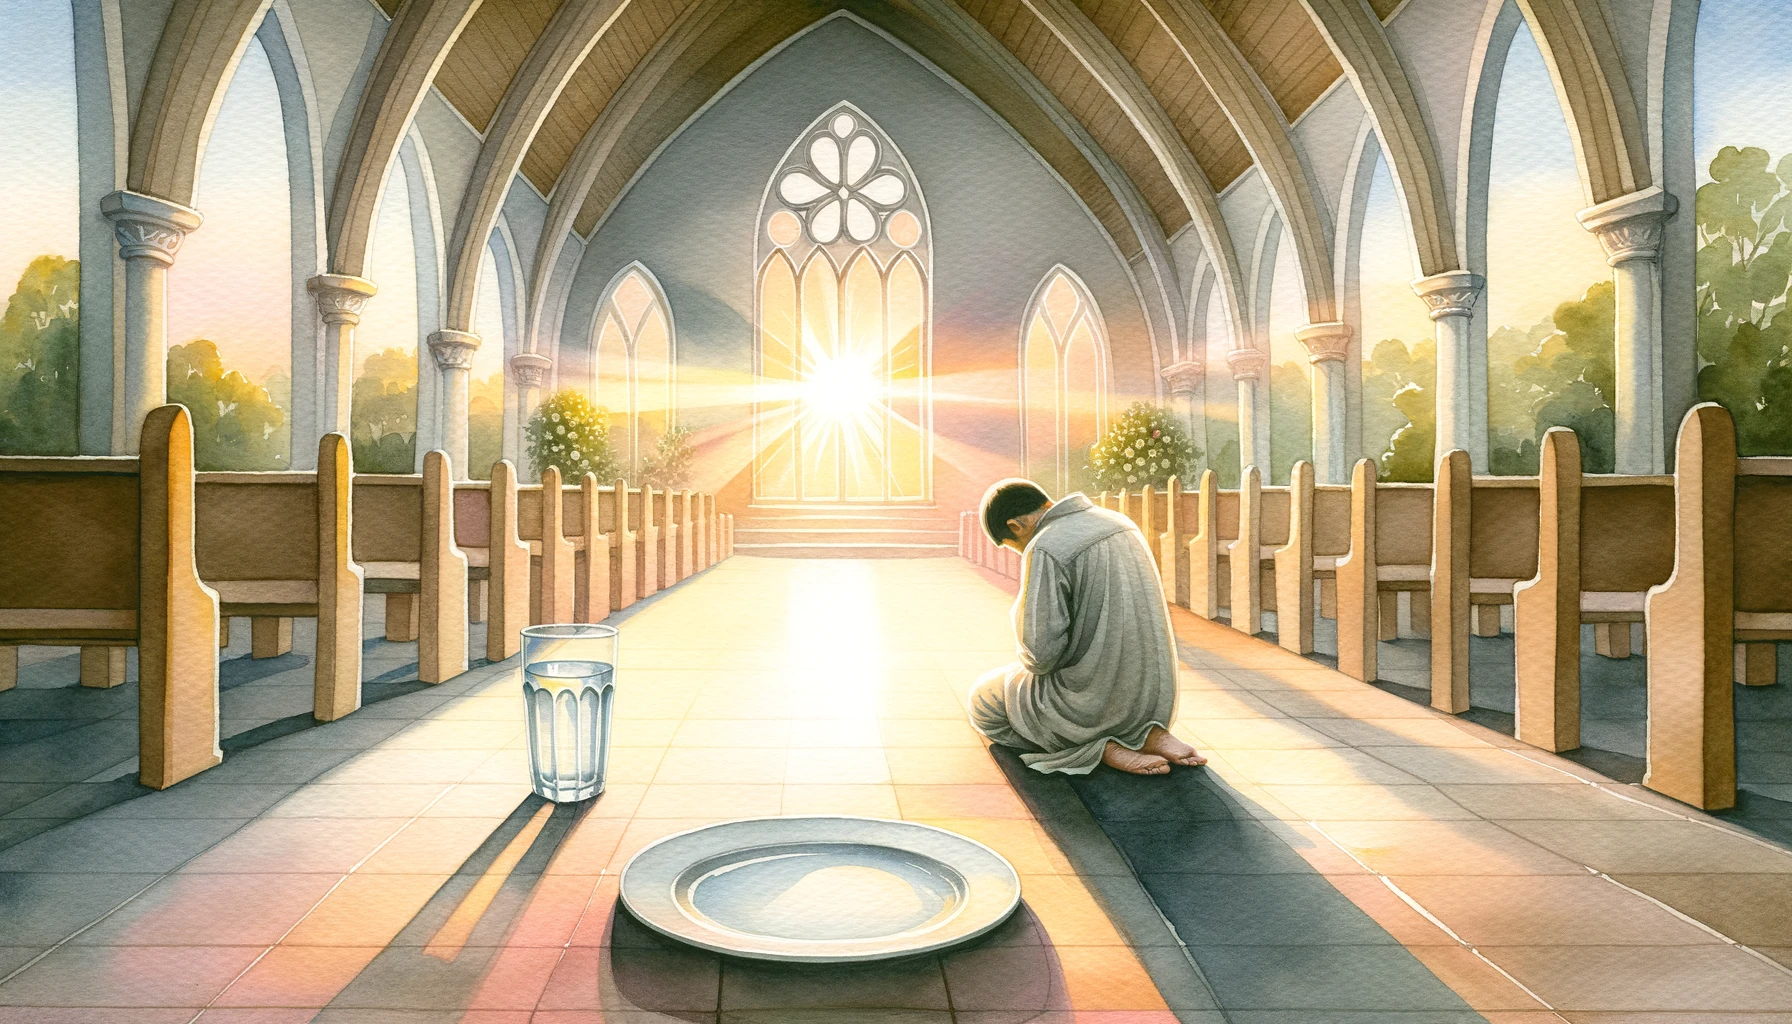 An individual kneels in prayer in a chapel with an empty plate and a glass of water, symbolizing fasting. Soft light through the windows embodies the Christian significance of fasting.